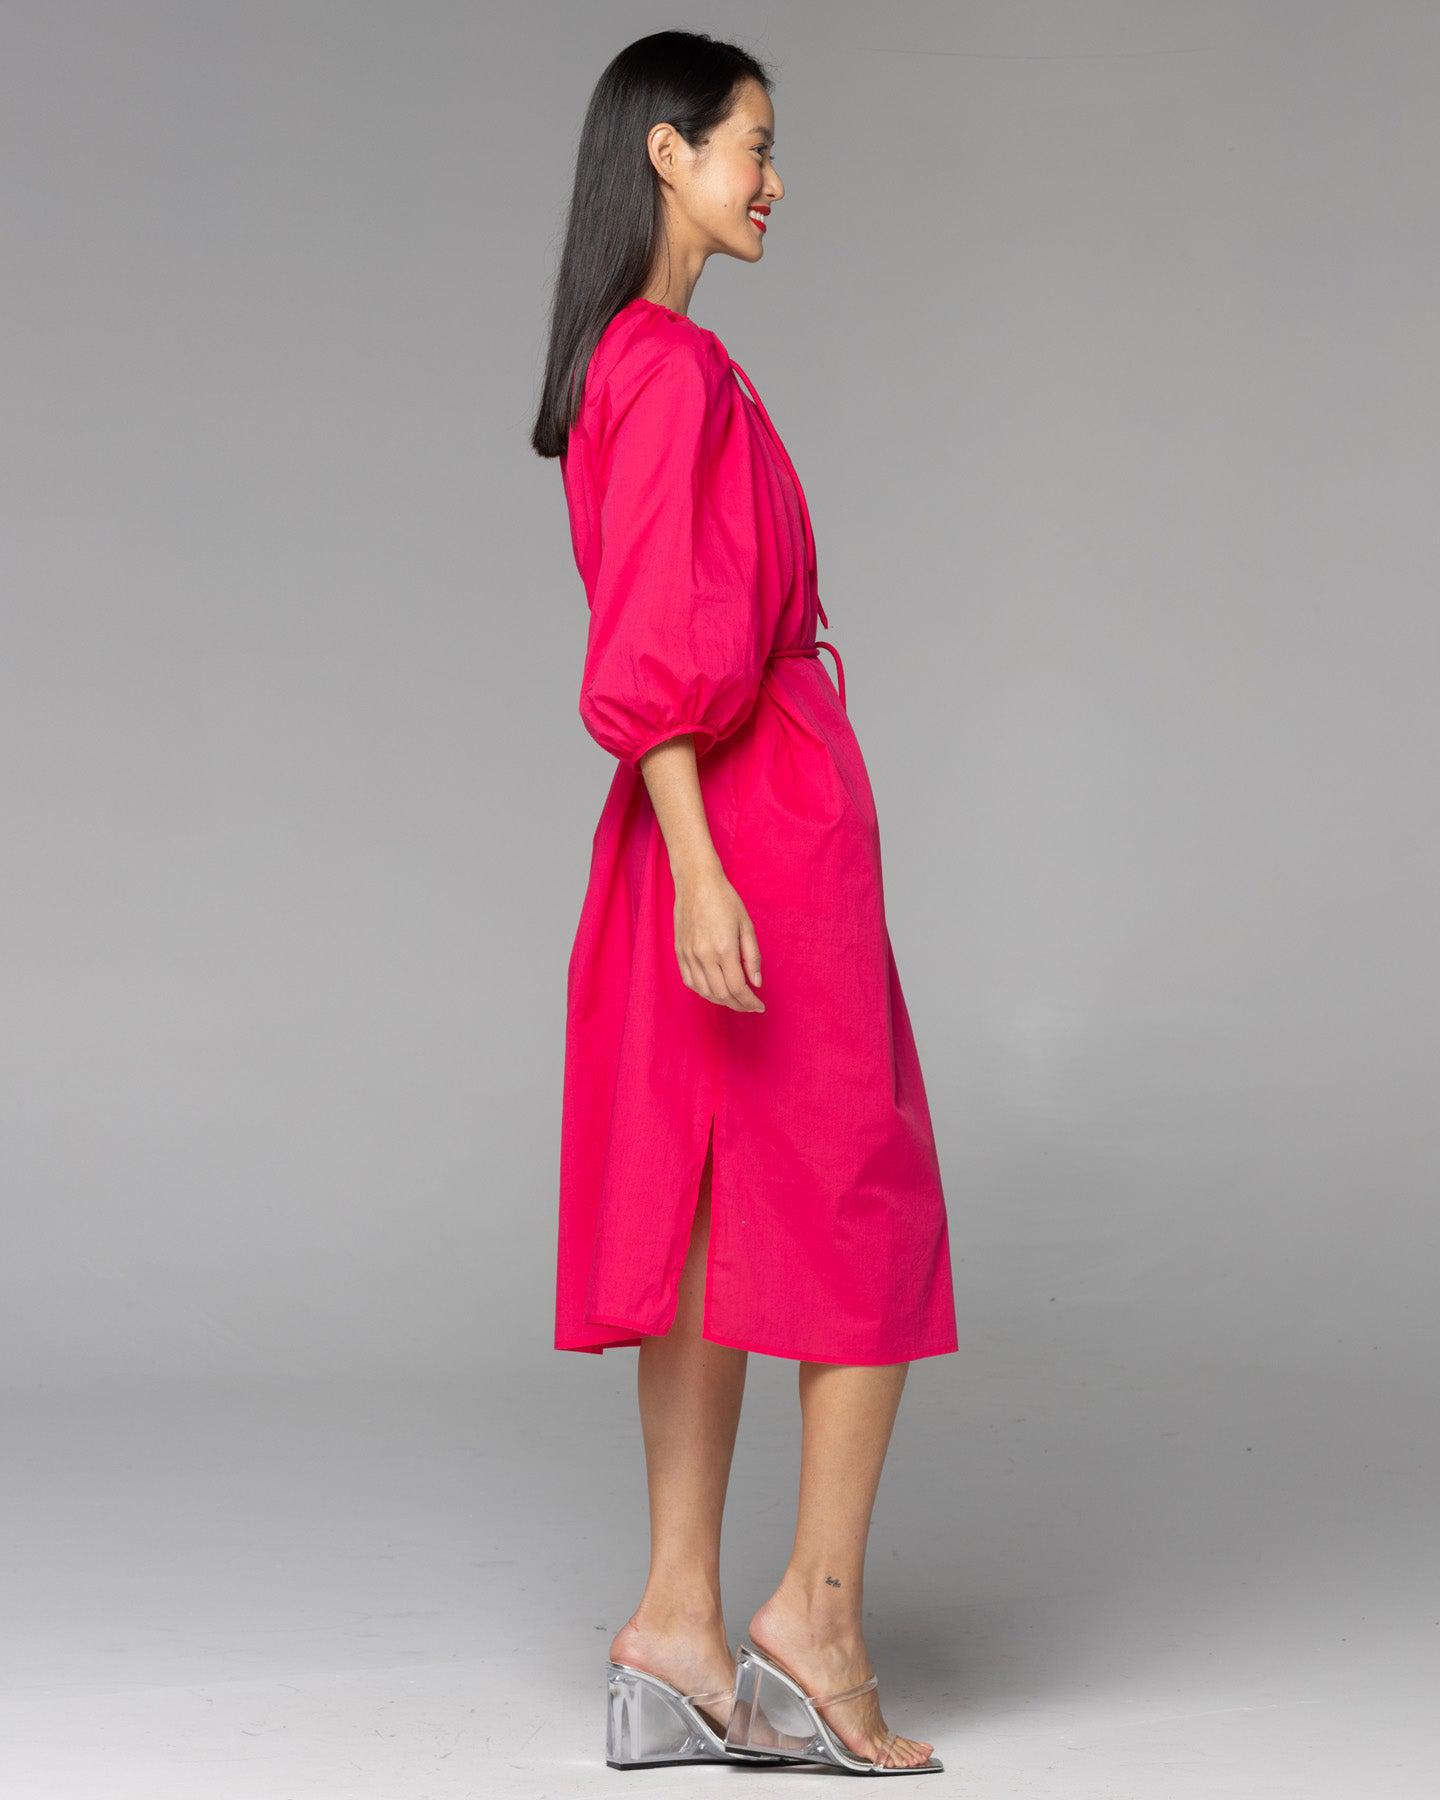 Believer Rope Midi Dress - Ruby Pink-Dresses-Fate + Becker-The Bay Room